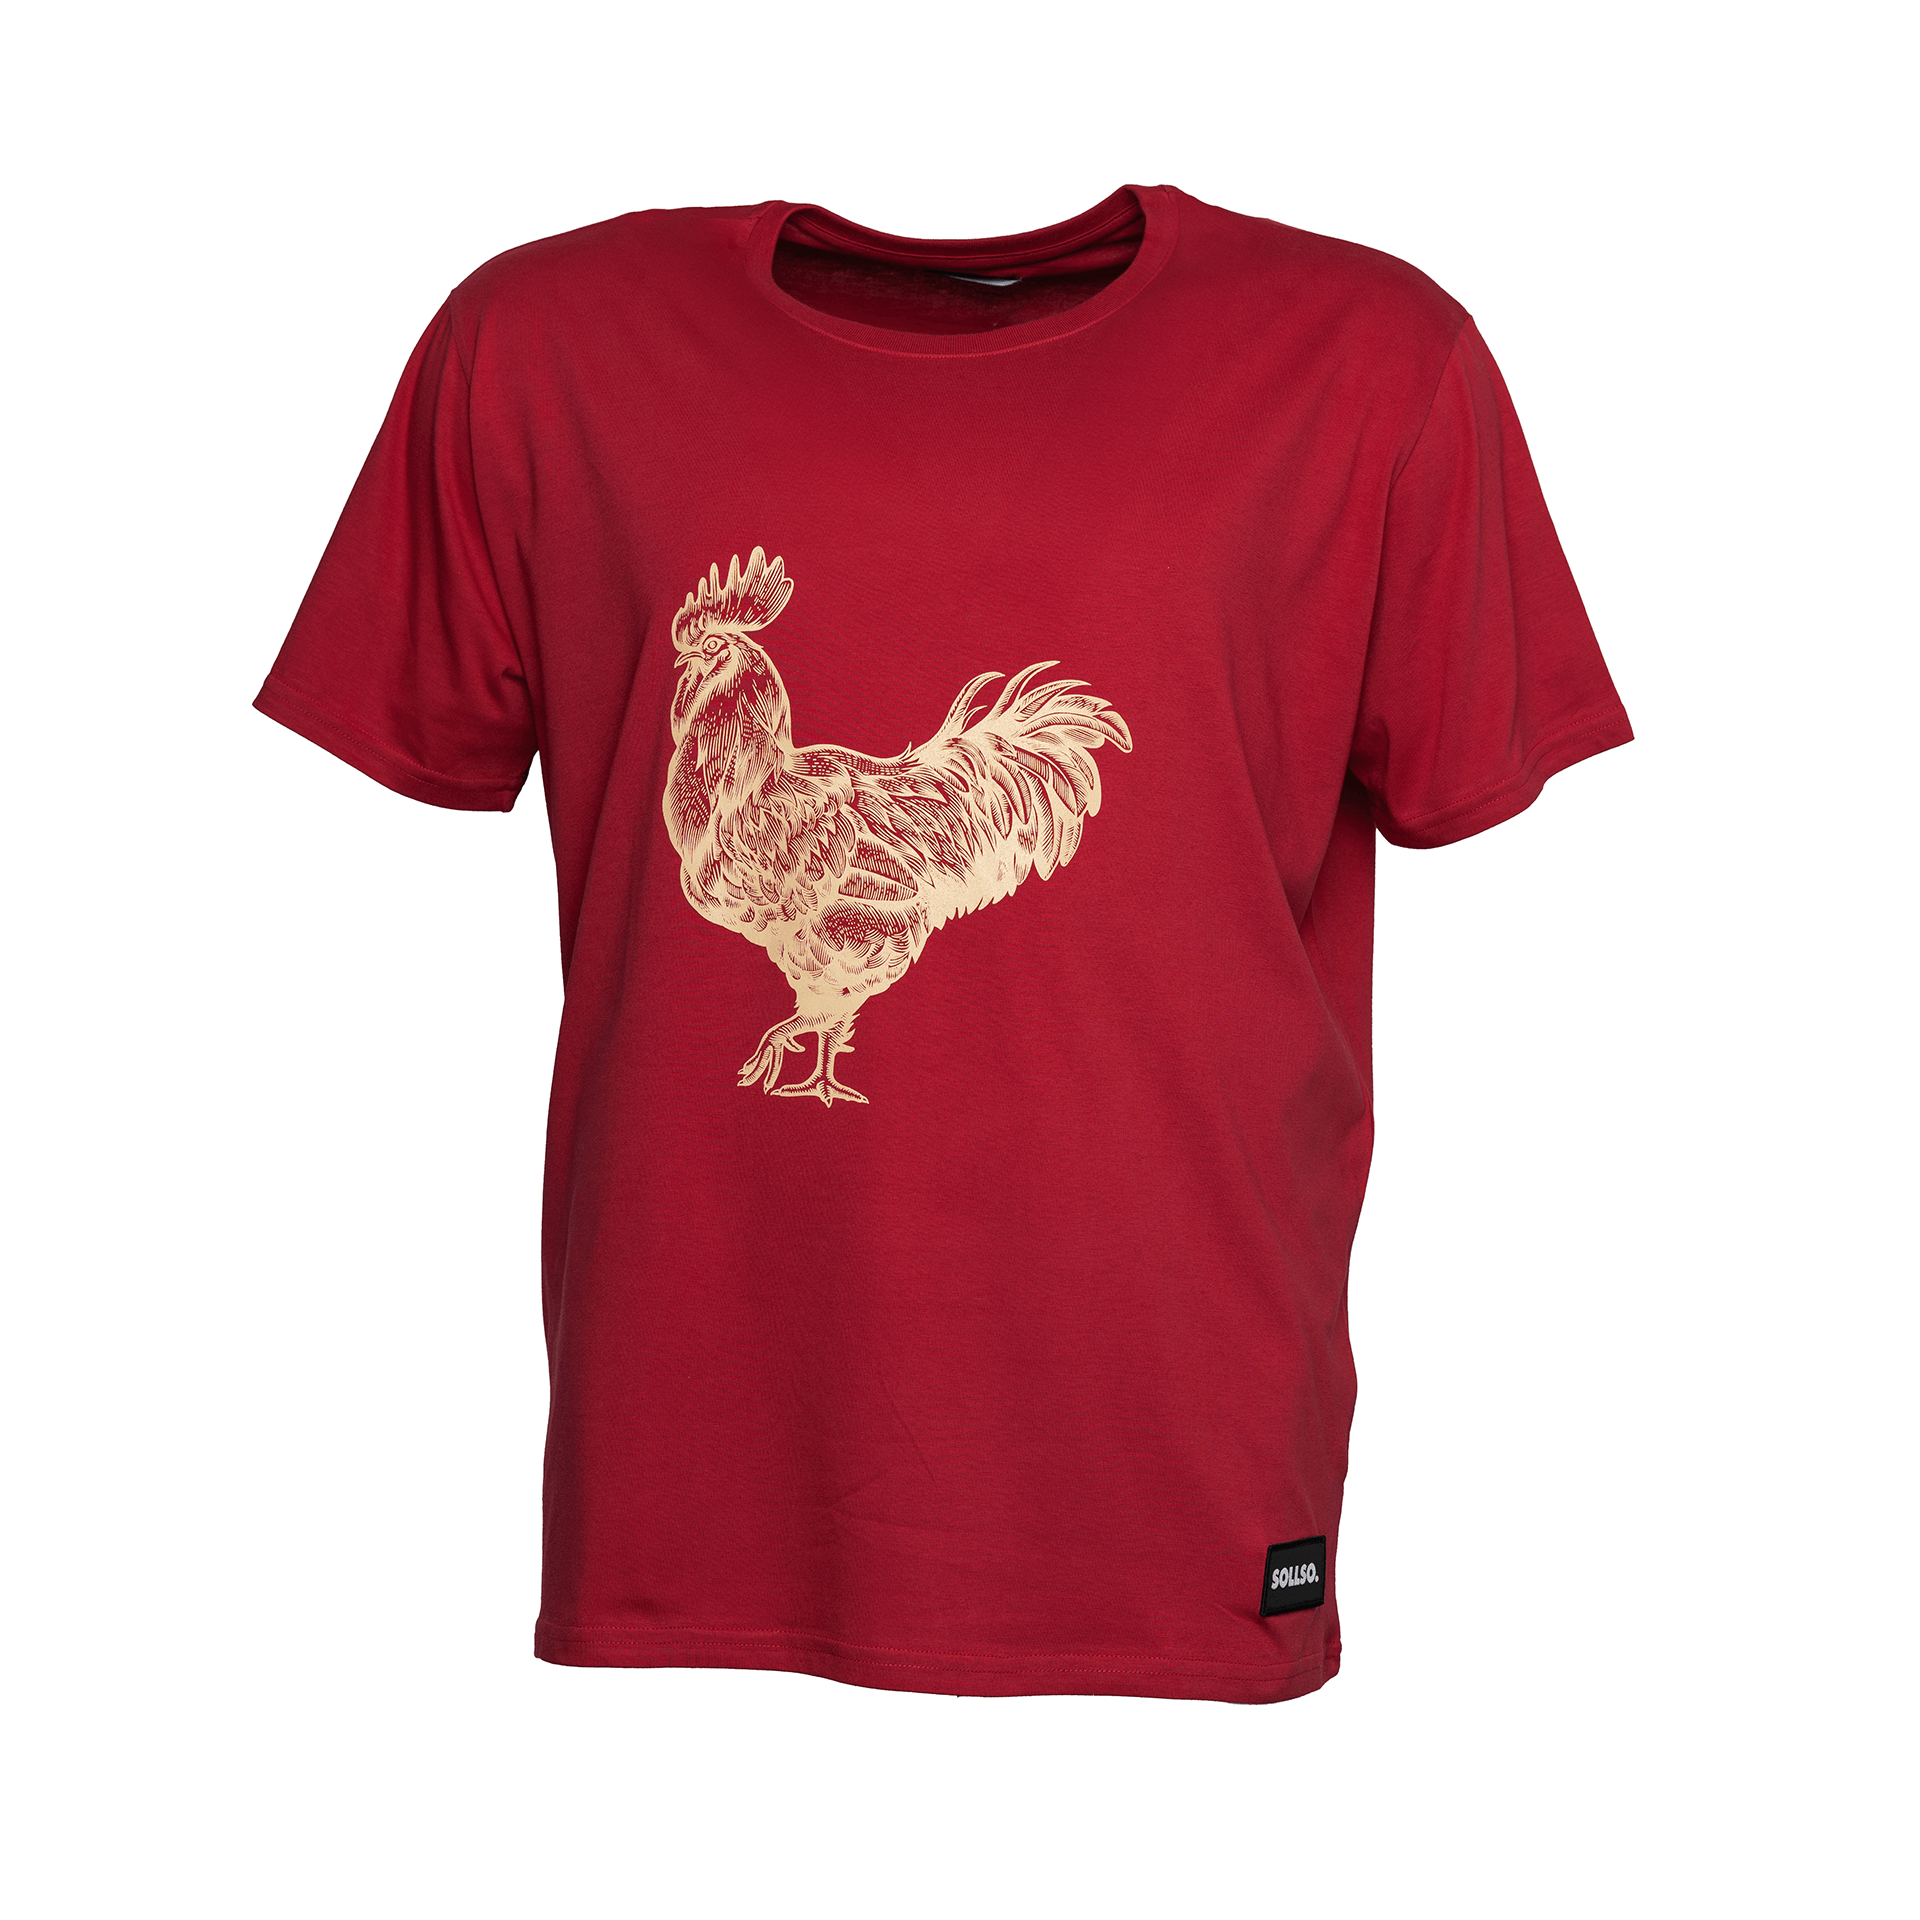 SOLLSO. T-Shirt "Rooster", Farbe Ginger Red, Größe M